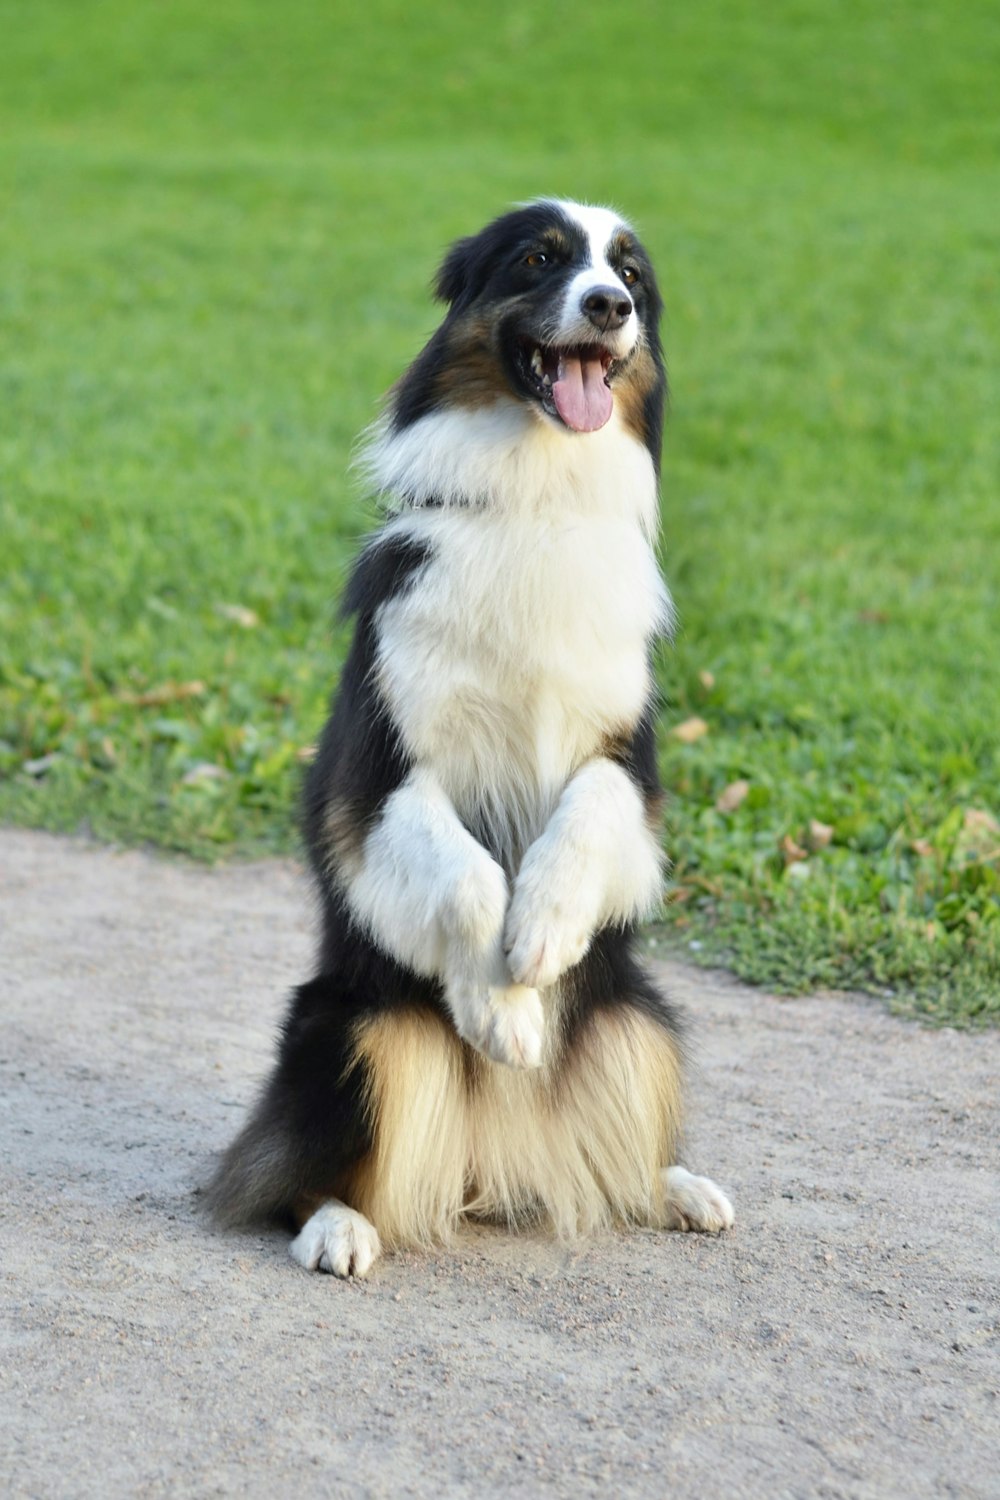 a black and white dog standing on its hind legs